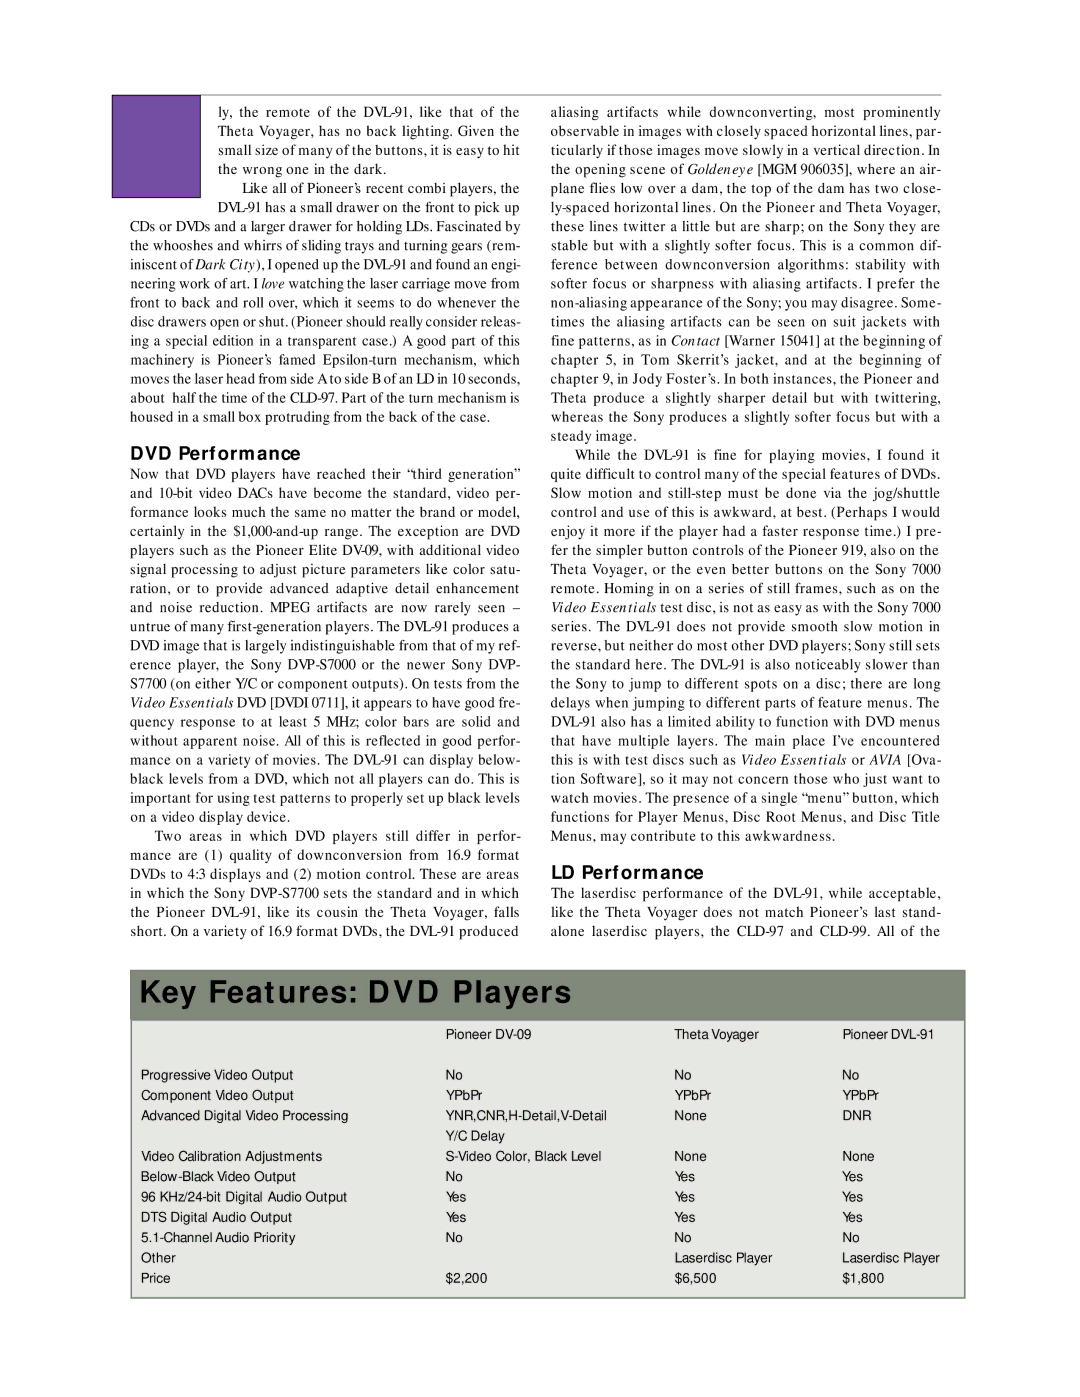 Sony G90 manual DVD Performance, LD Performance, Ly, the remote of the DVL-91, like that, Wrong one in the dark 